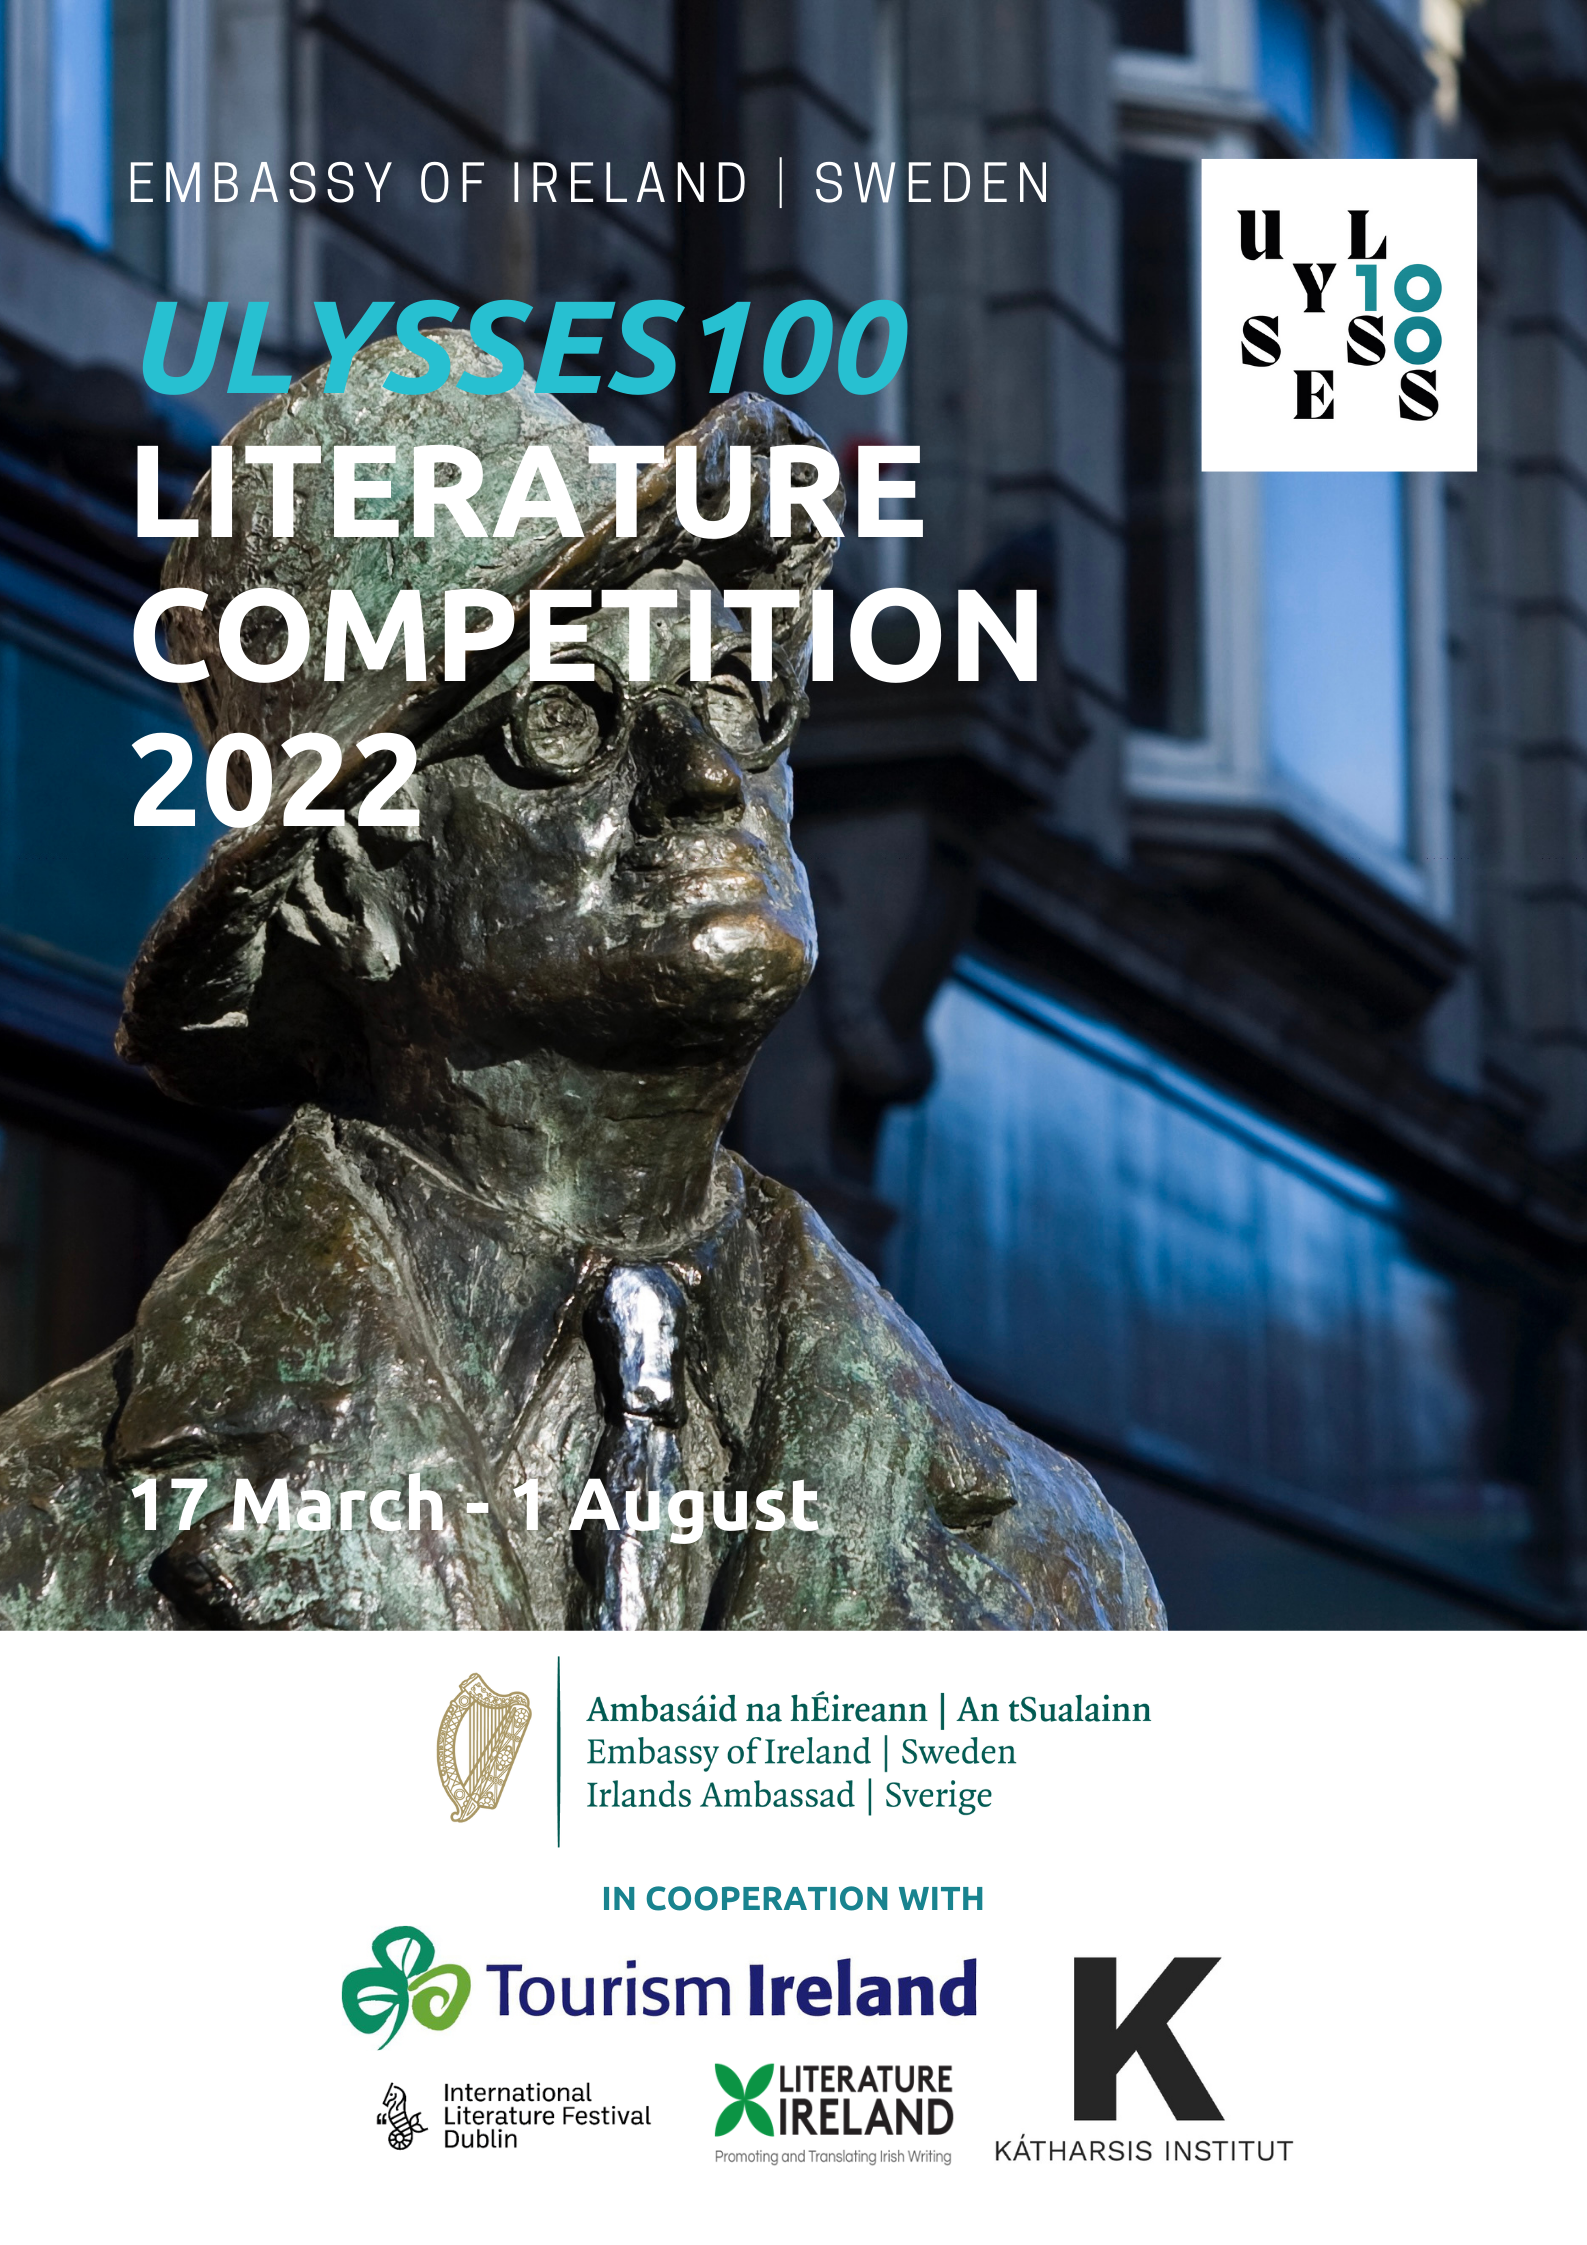 Ulysses100 Literature Competition 2022